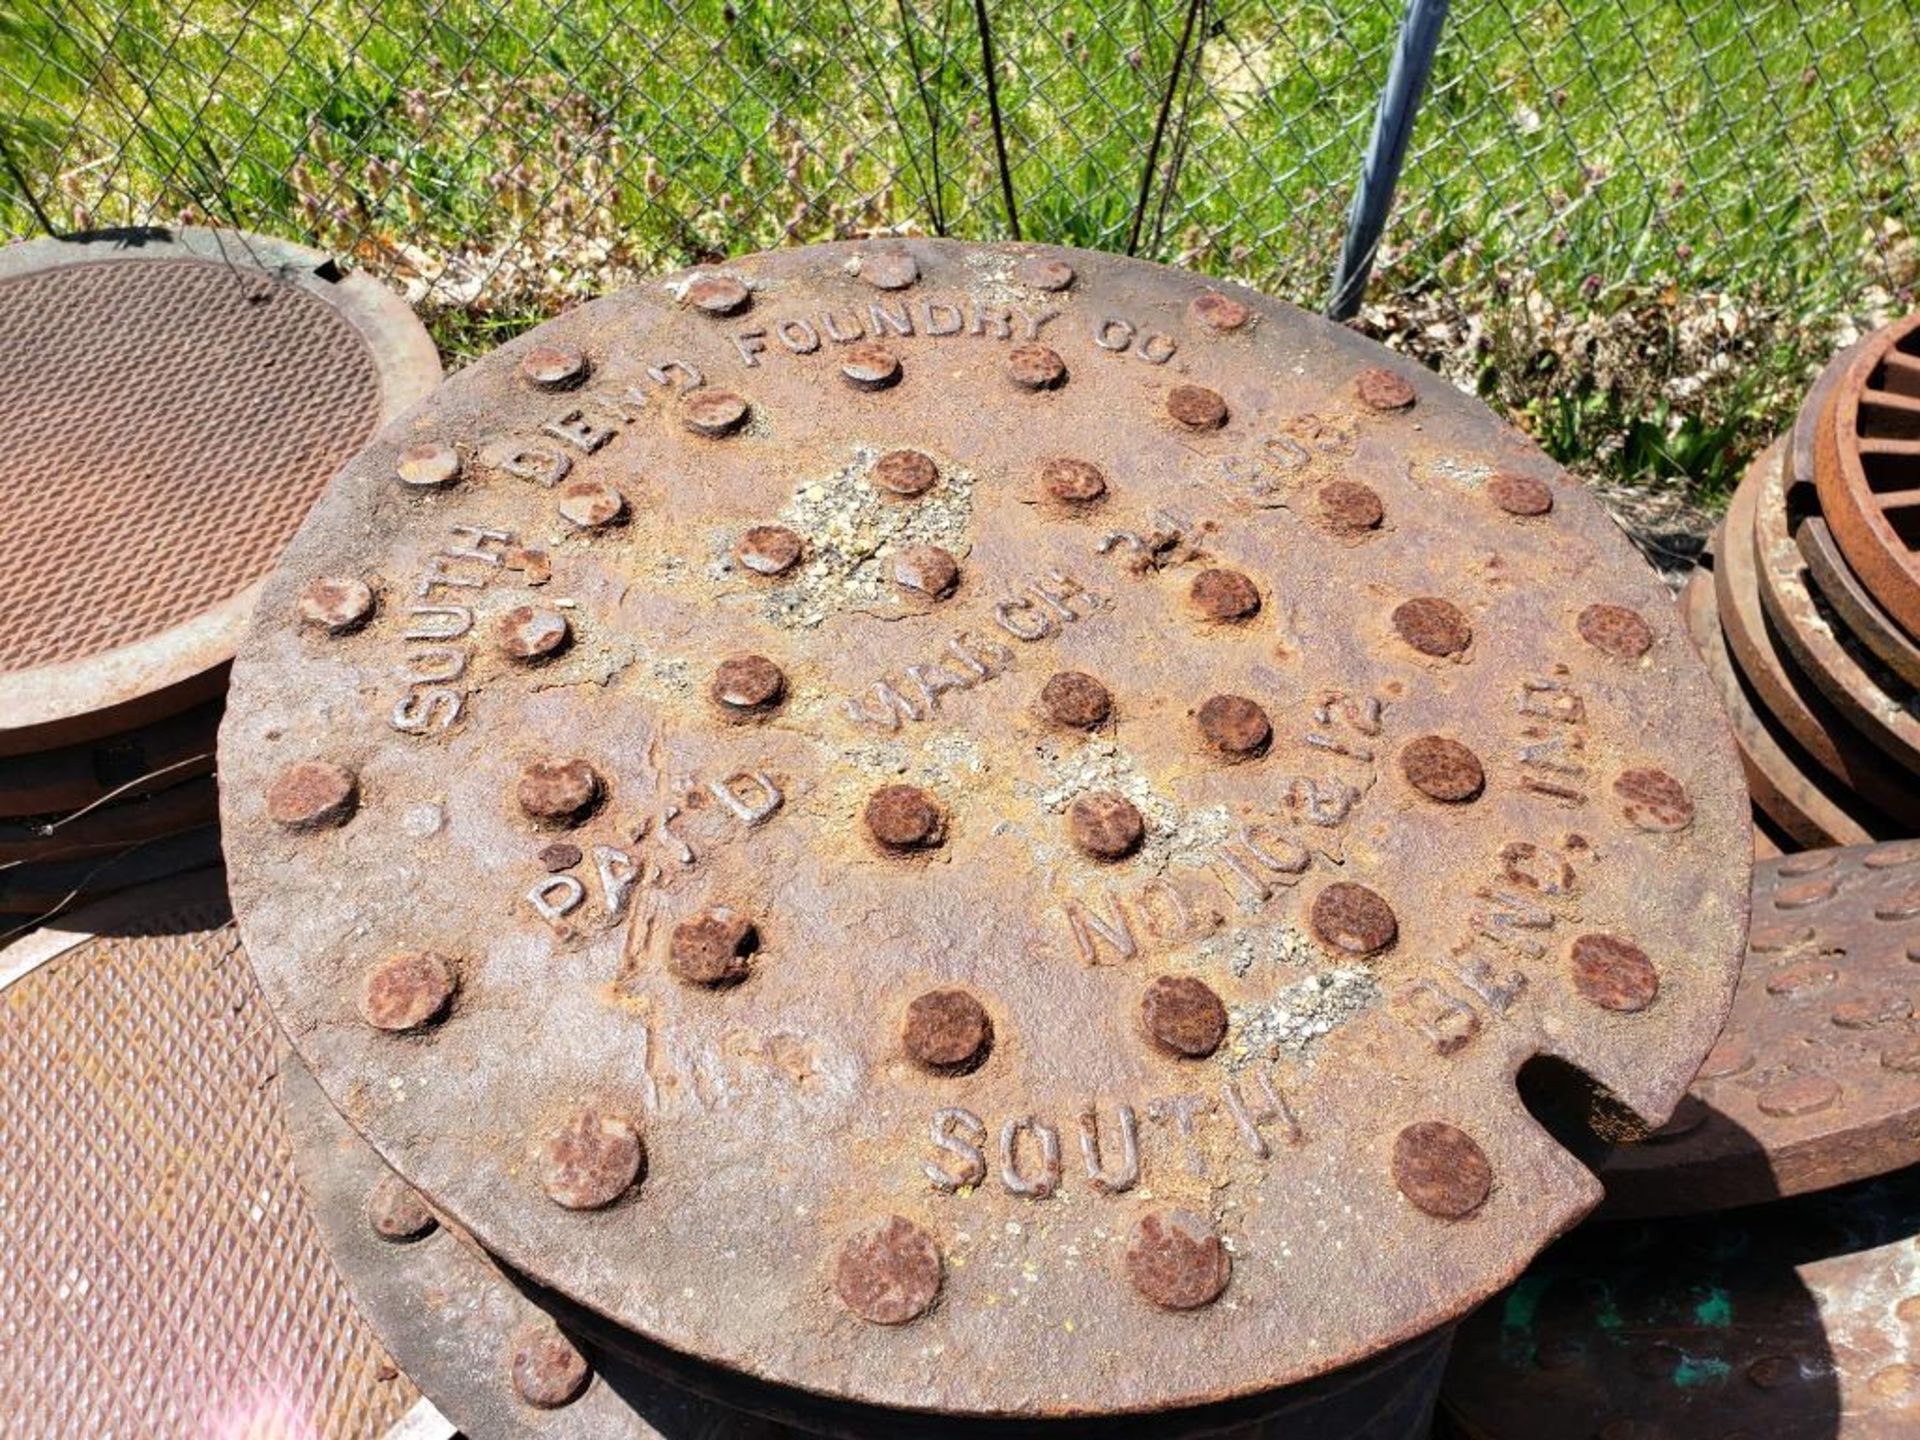 Assorted man hole covers. (units with pink marking are NOT included in lot) - Image 4 of 5